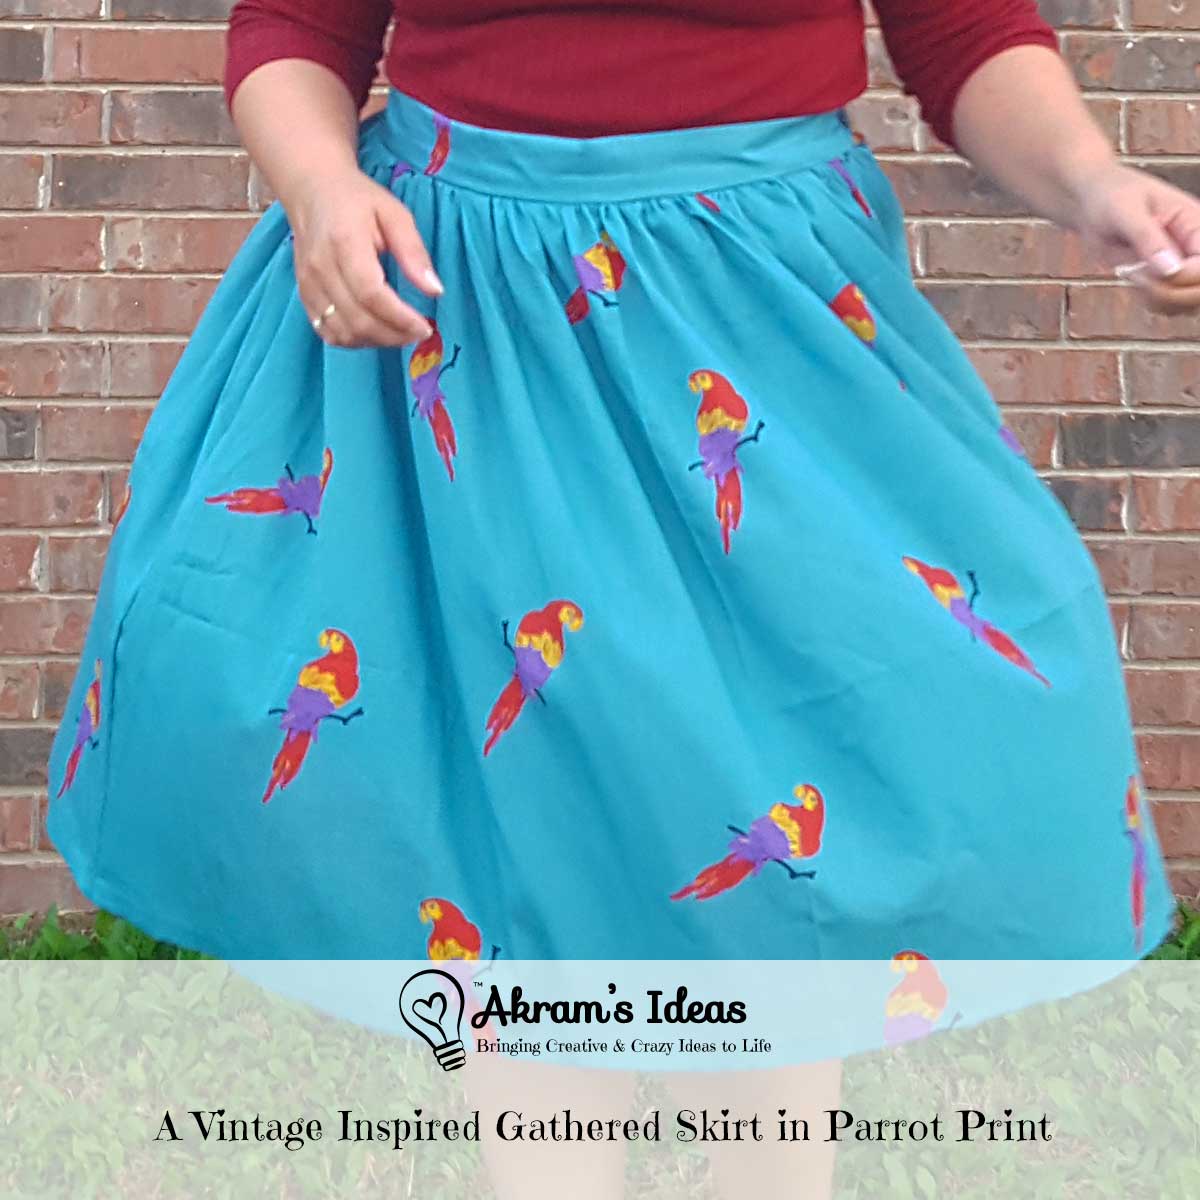 A Vintage Inspired Gathered Skirt in Parrot Print